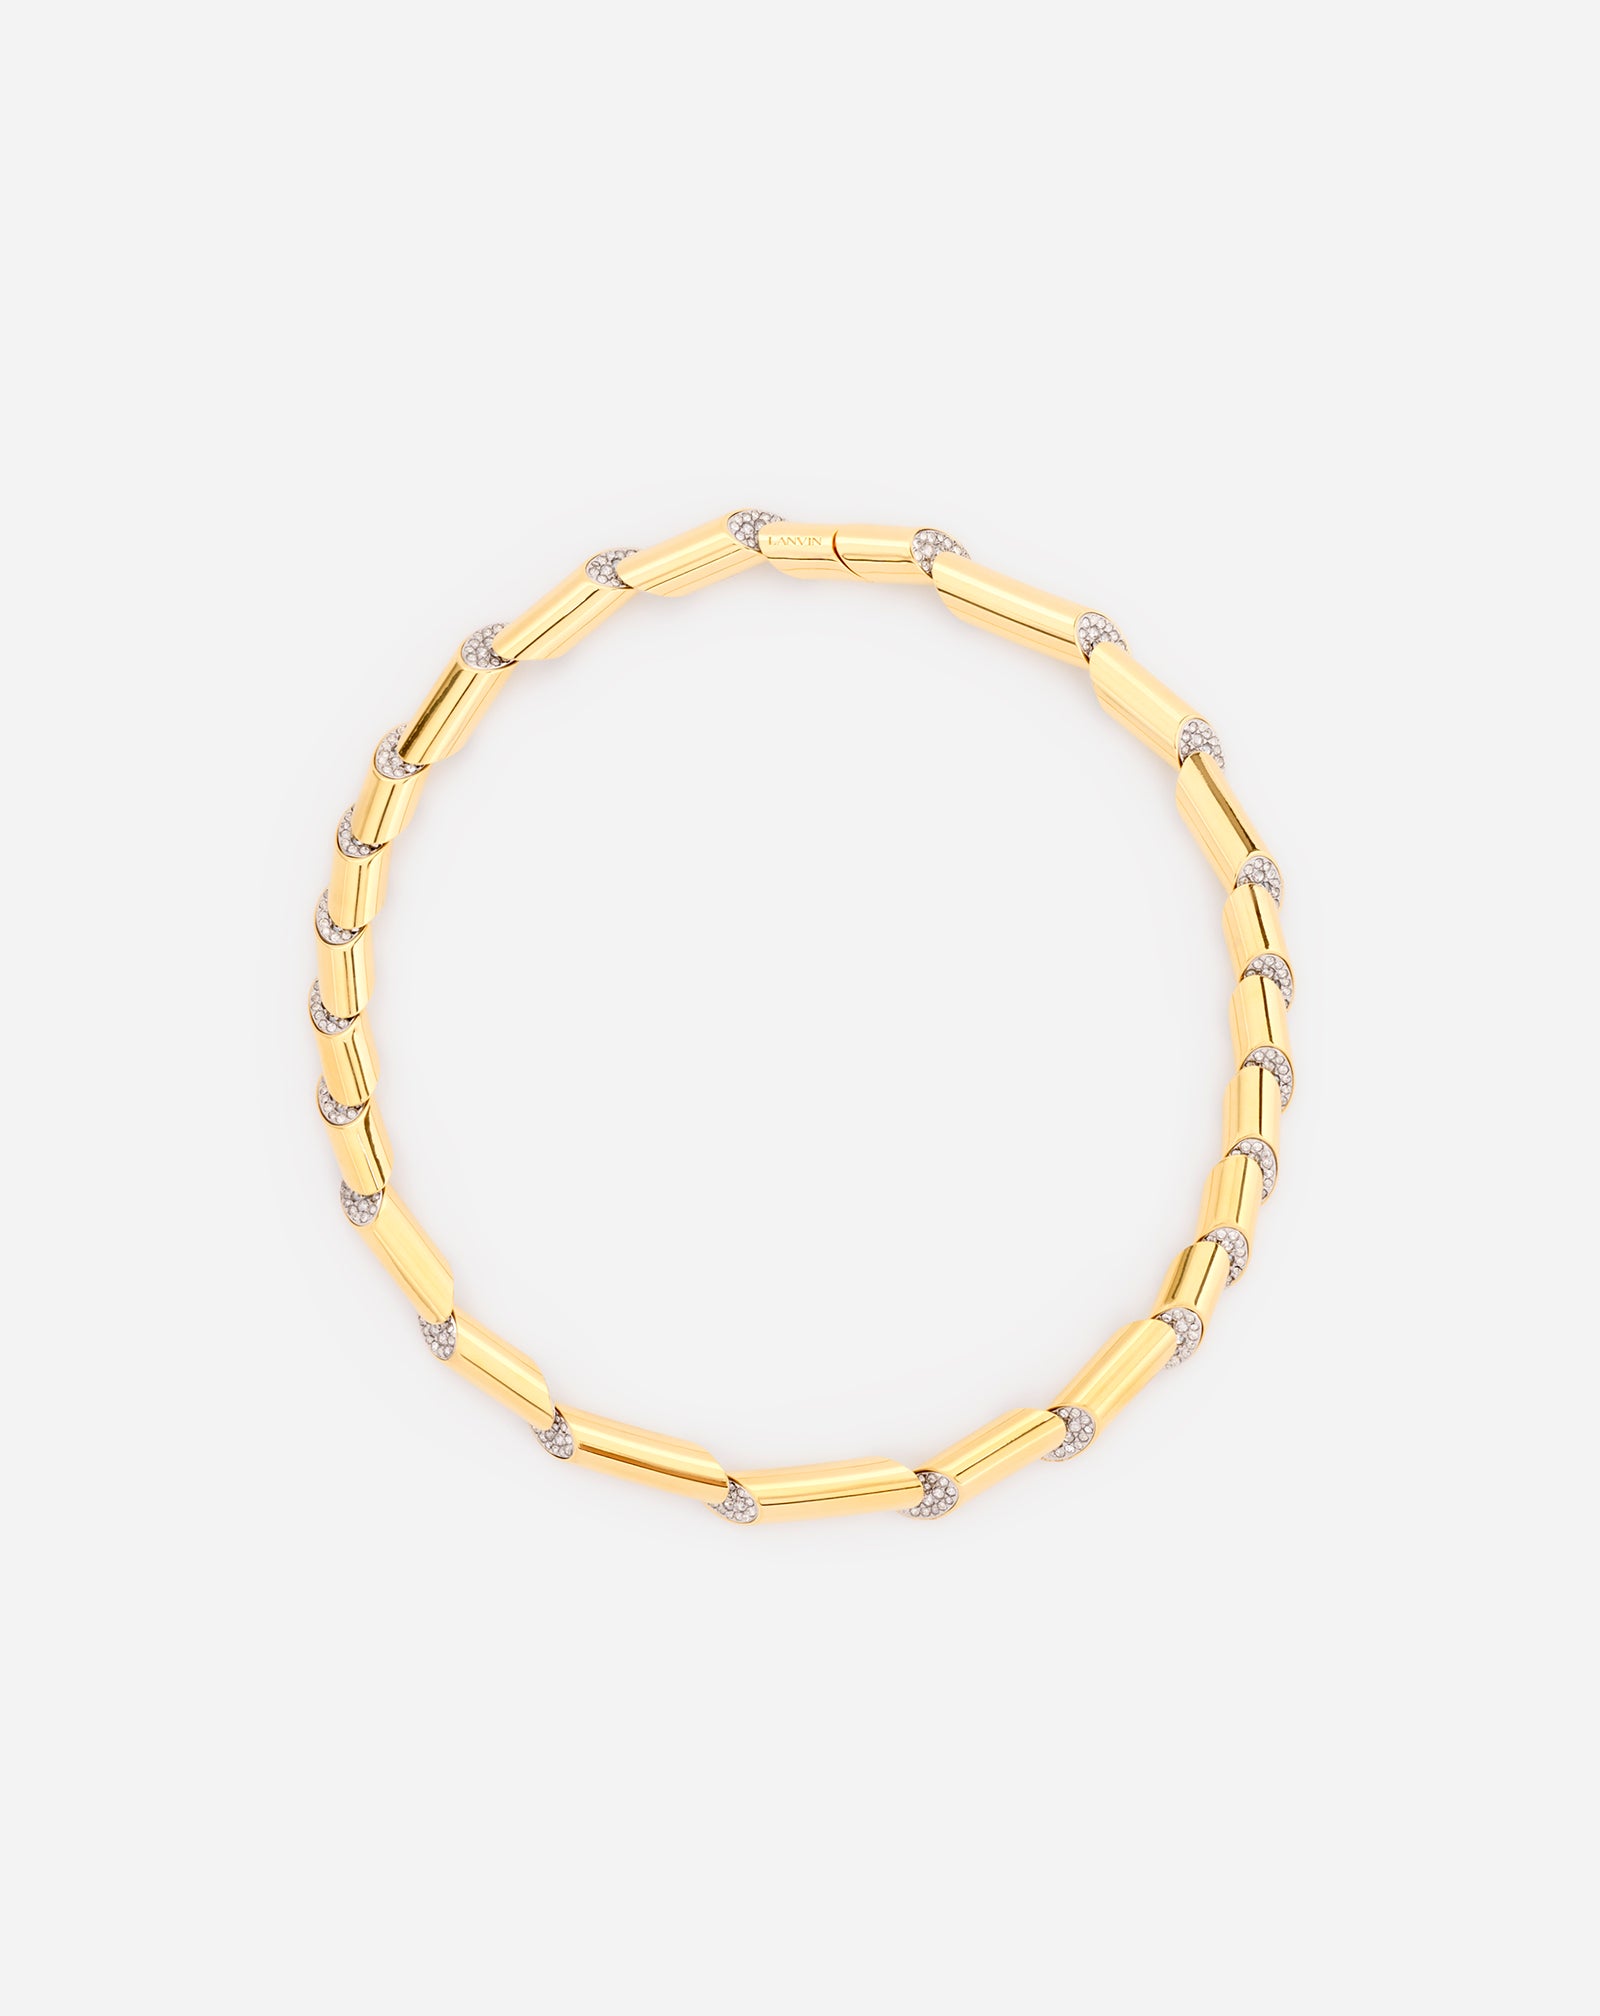 SEQUENCE BY LANVIN RHINESTONE CHOKER NECKLACE, GOLD/CRYSTAL